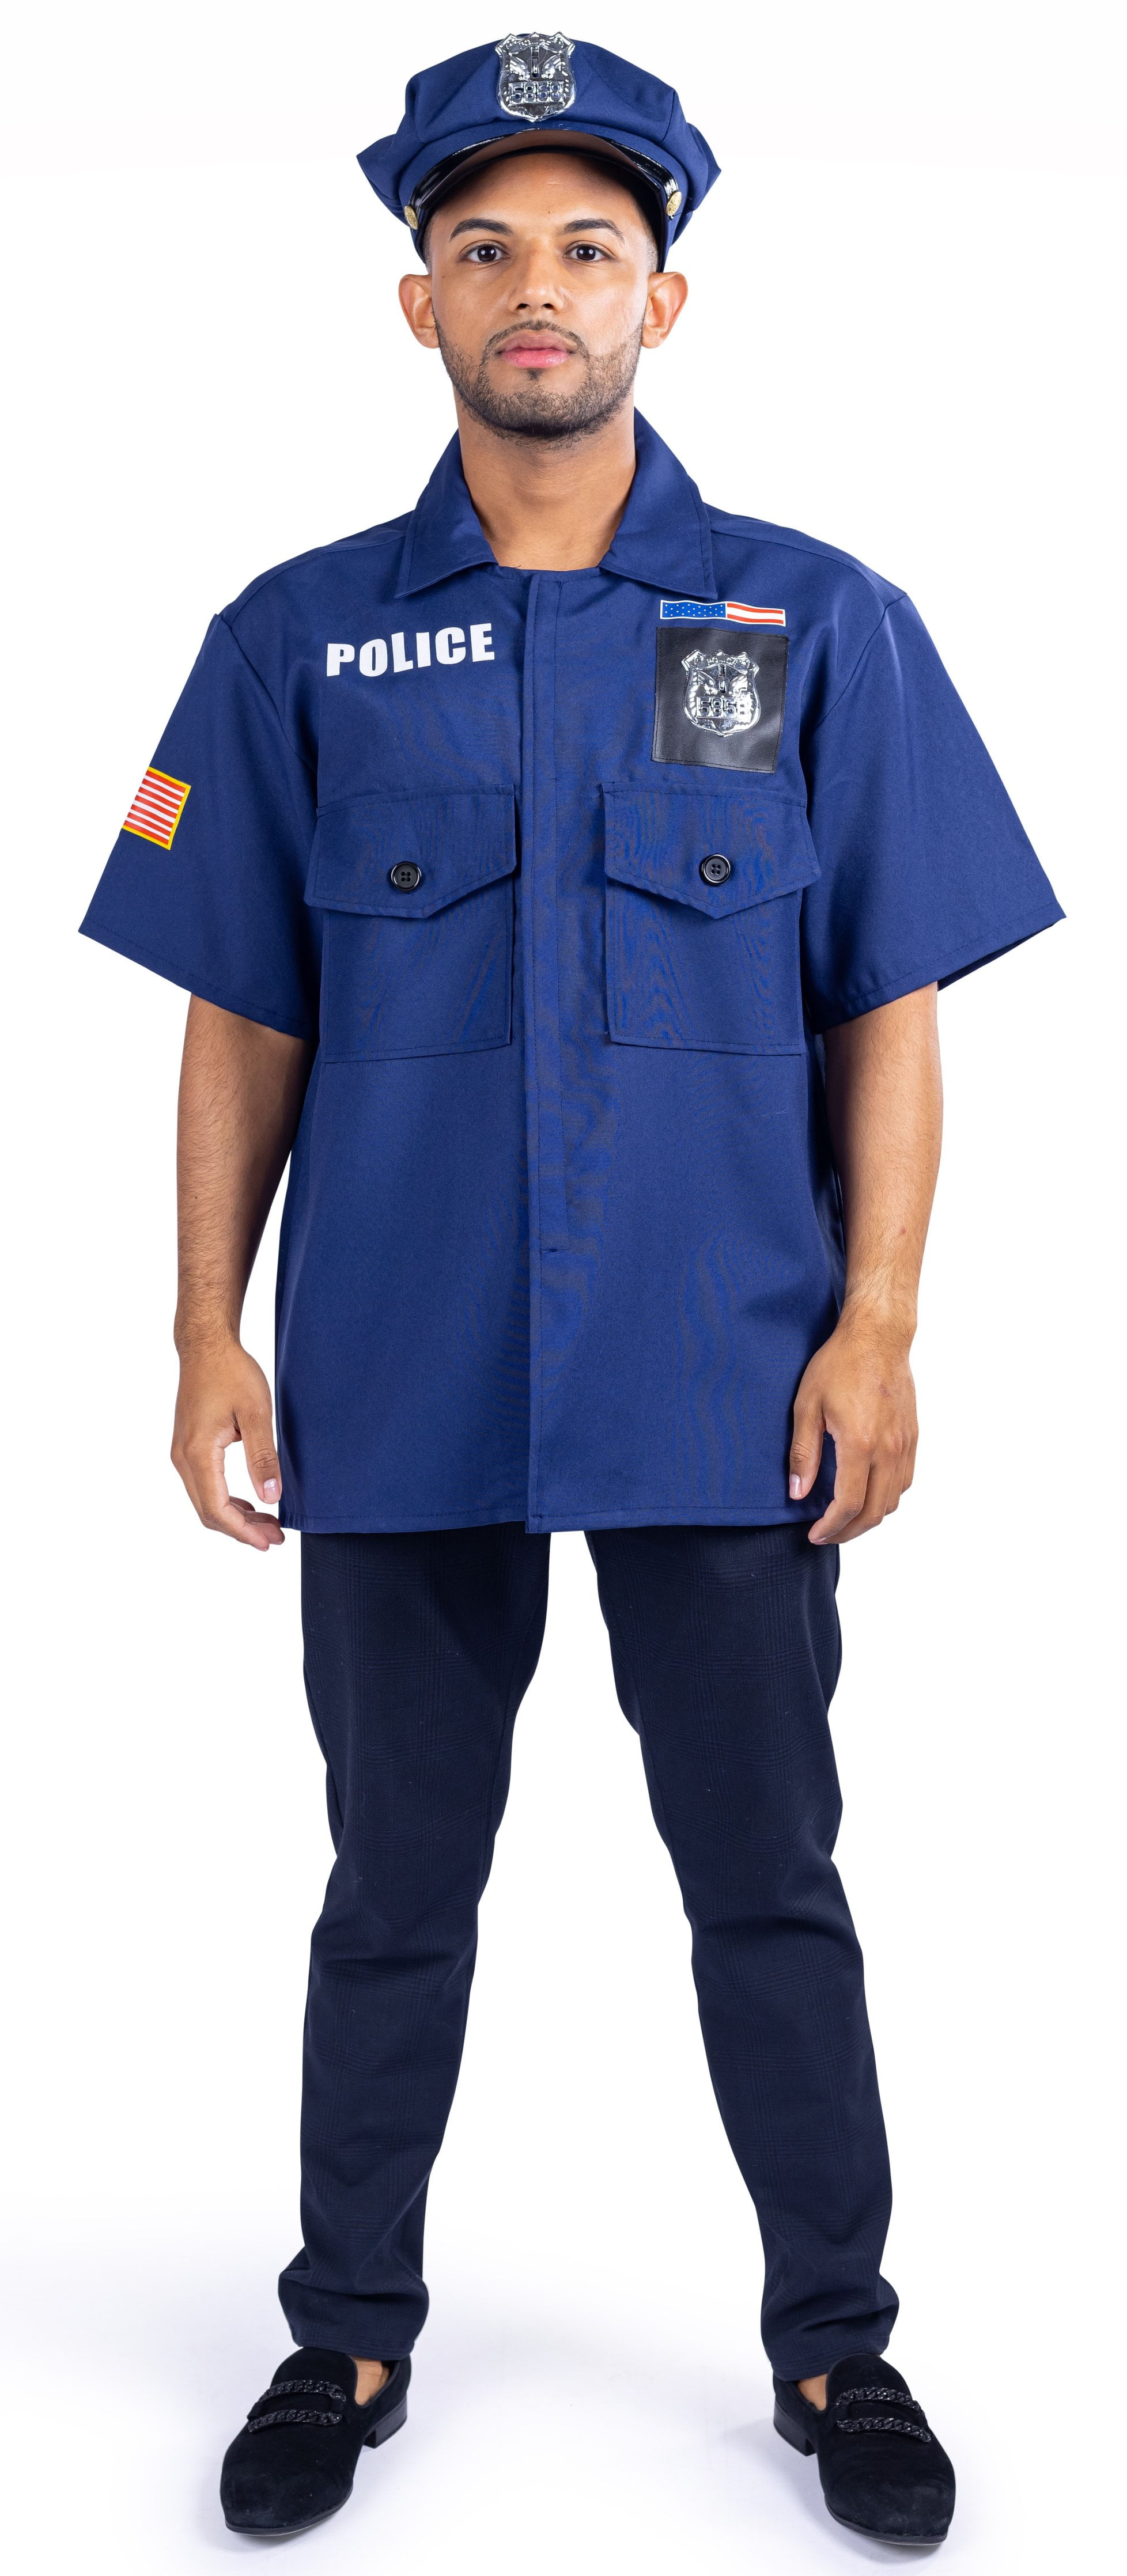 Dress-Up-America Police Costume for Adults - Cop Costume for Men - Police  Officer Shirt and Cap - One size